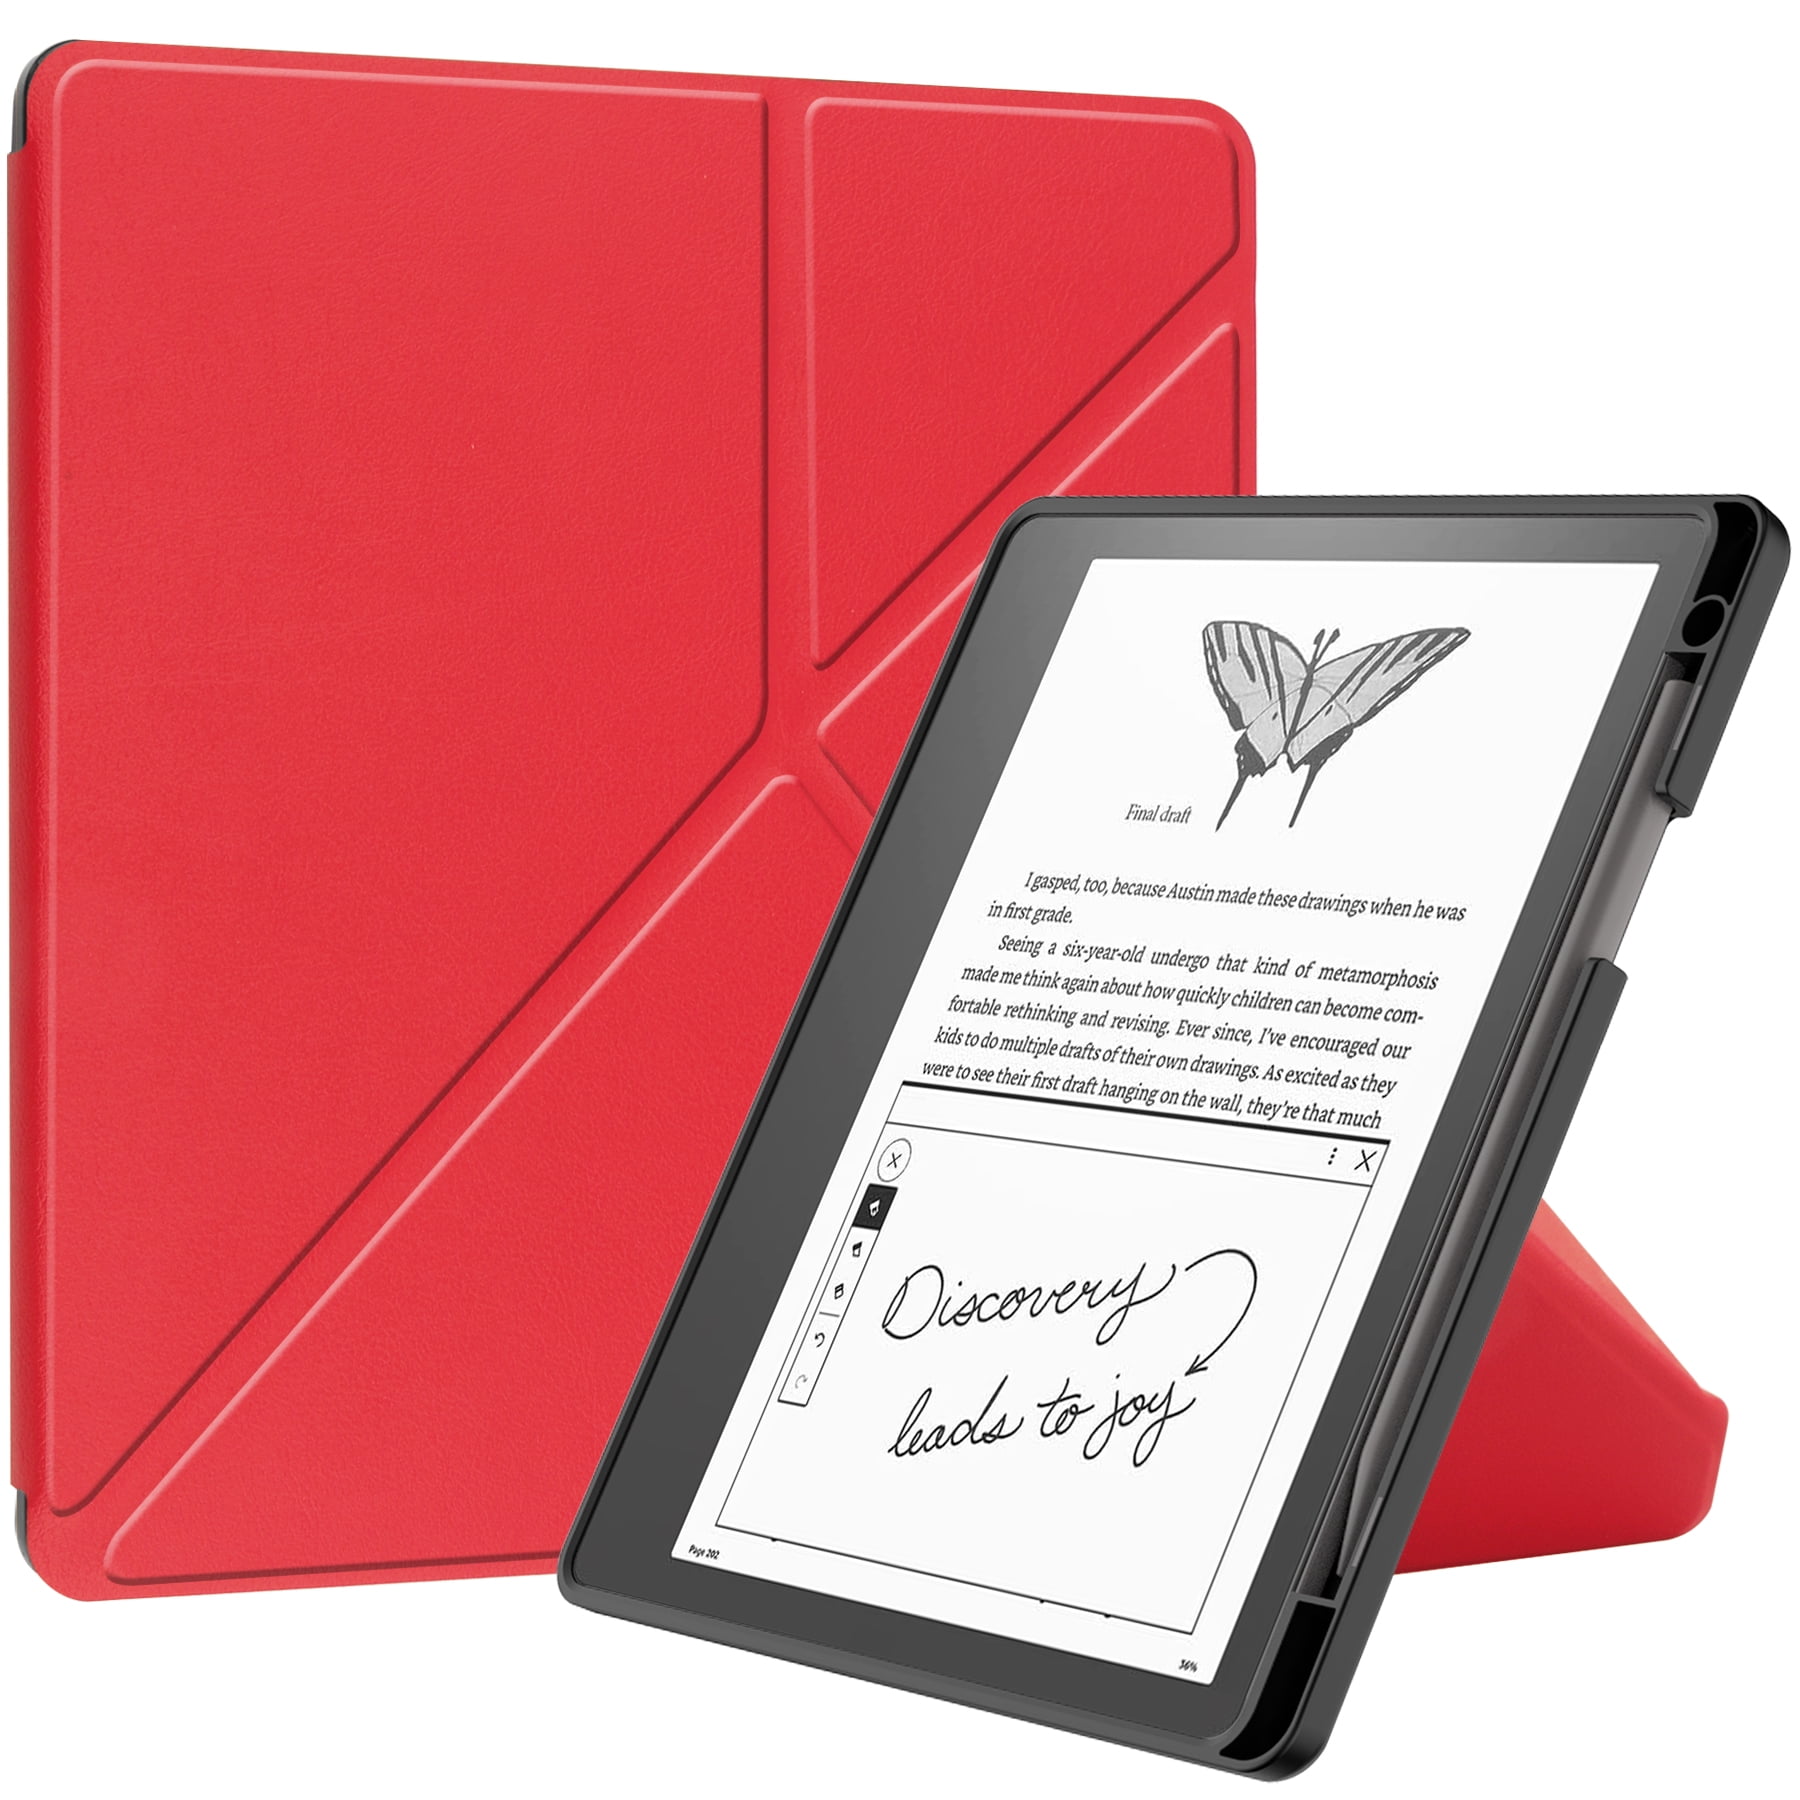 Allytech Case for Kindle Paperwhite 10th Gen 2018, Lightweight Smart Cover  Auto Sleep Wake Shockproof Full Protection Shock-absorbing TPU Back Cover  for Kindle Paperwhite All Generations, Red 